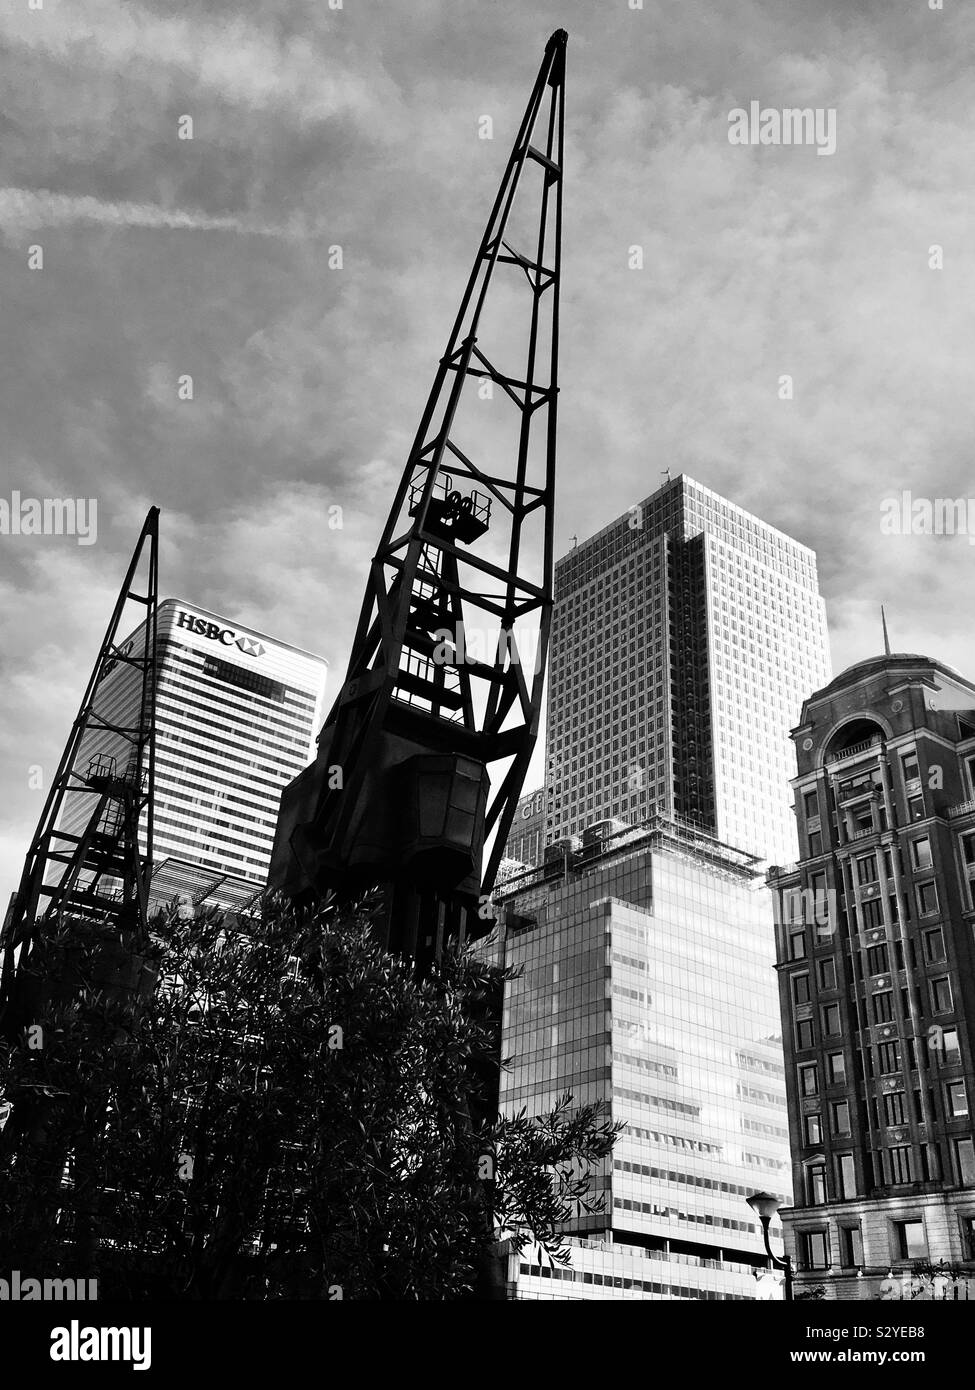 The Return of the Cranes: Canary Wharf, London, 2019 Stock Photo